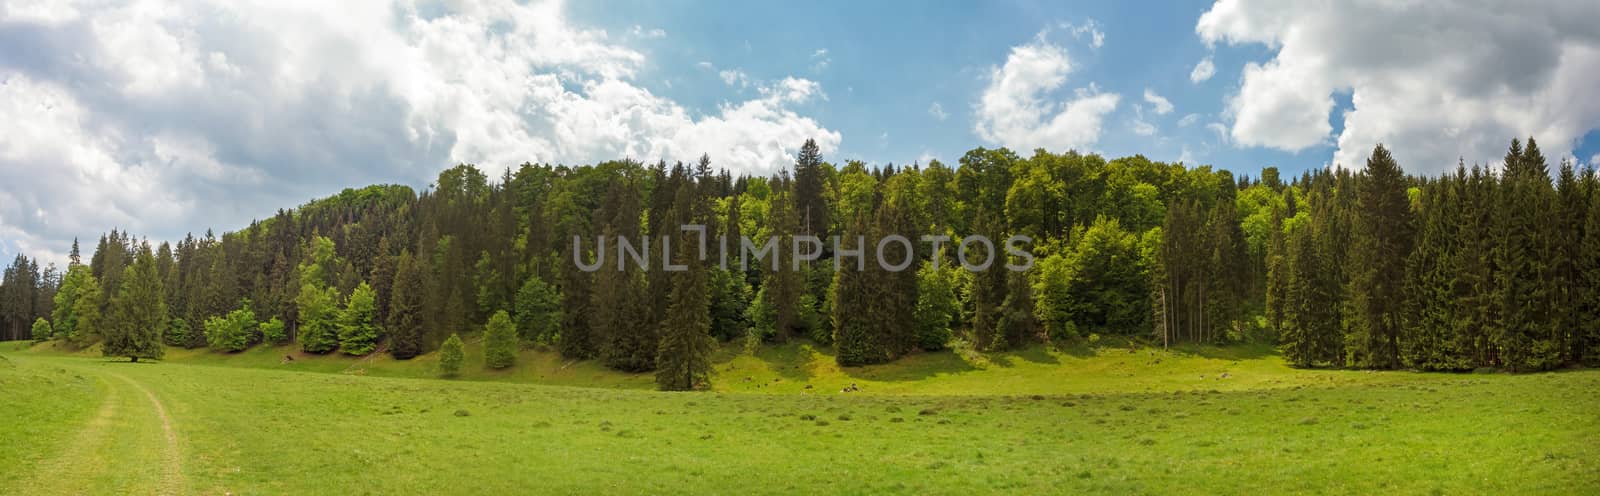 Panorama of the Wental valley at Swabian Alps near Steinheim and Bartholomae